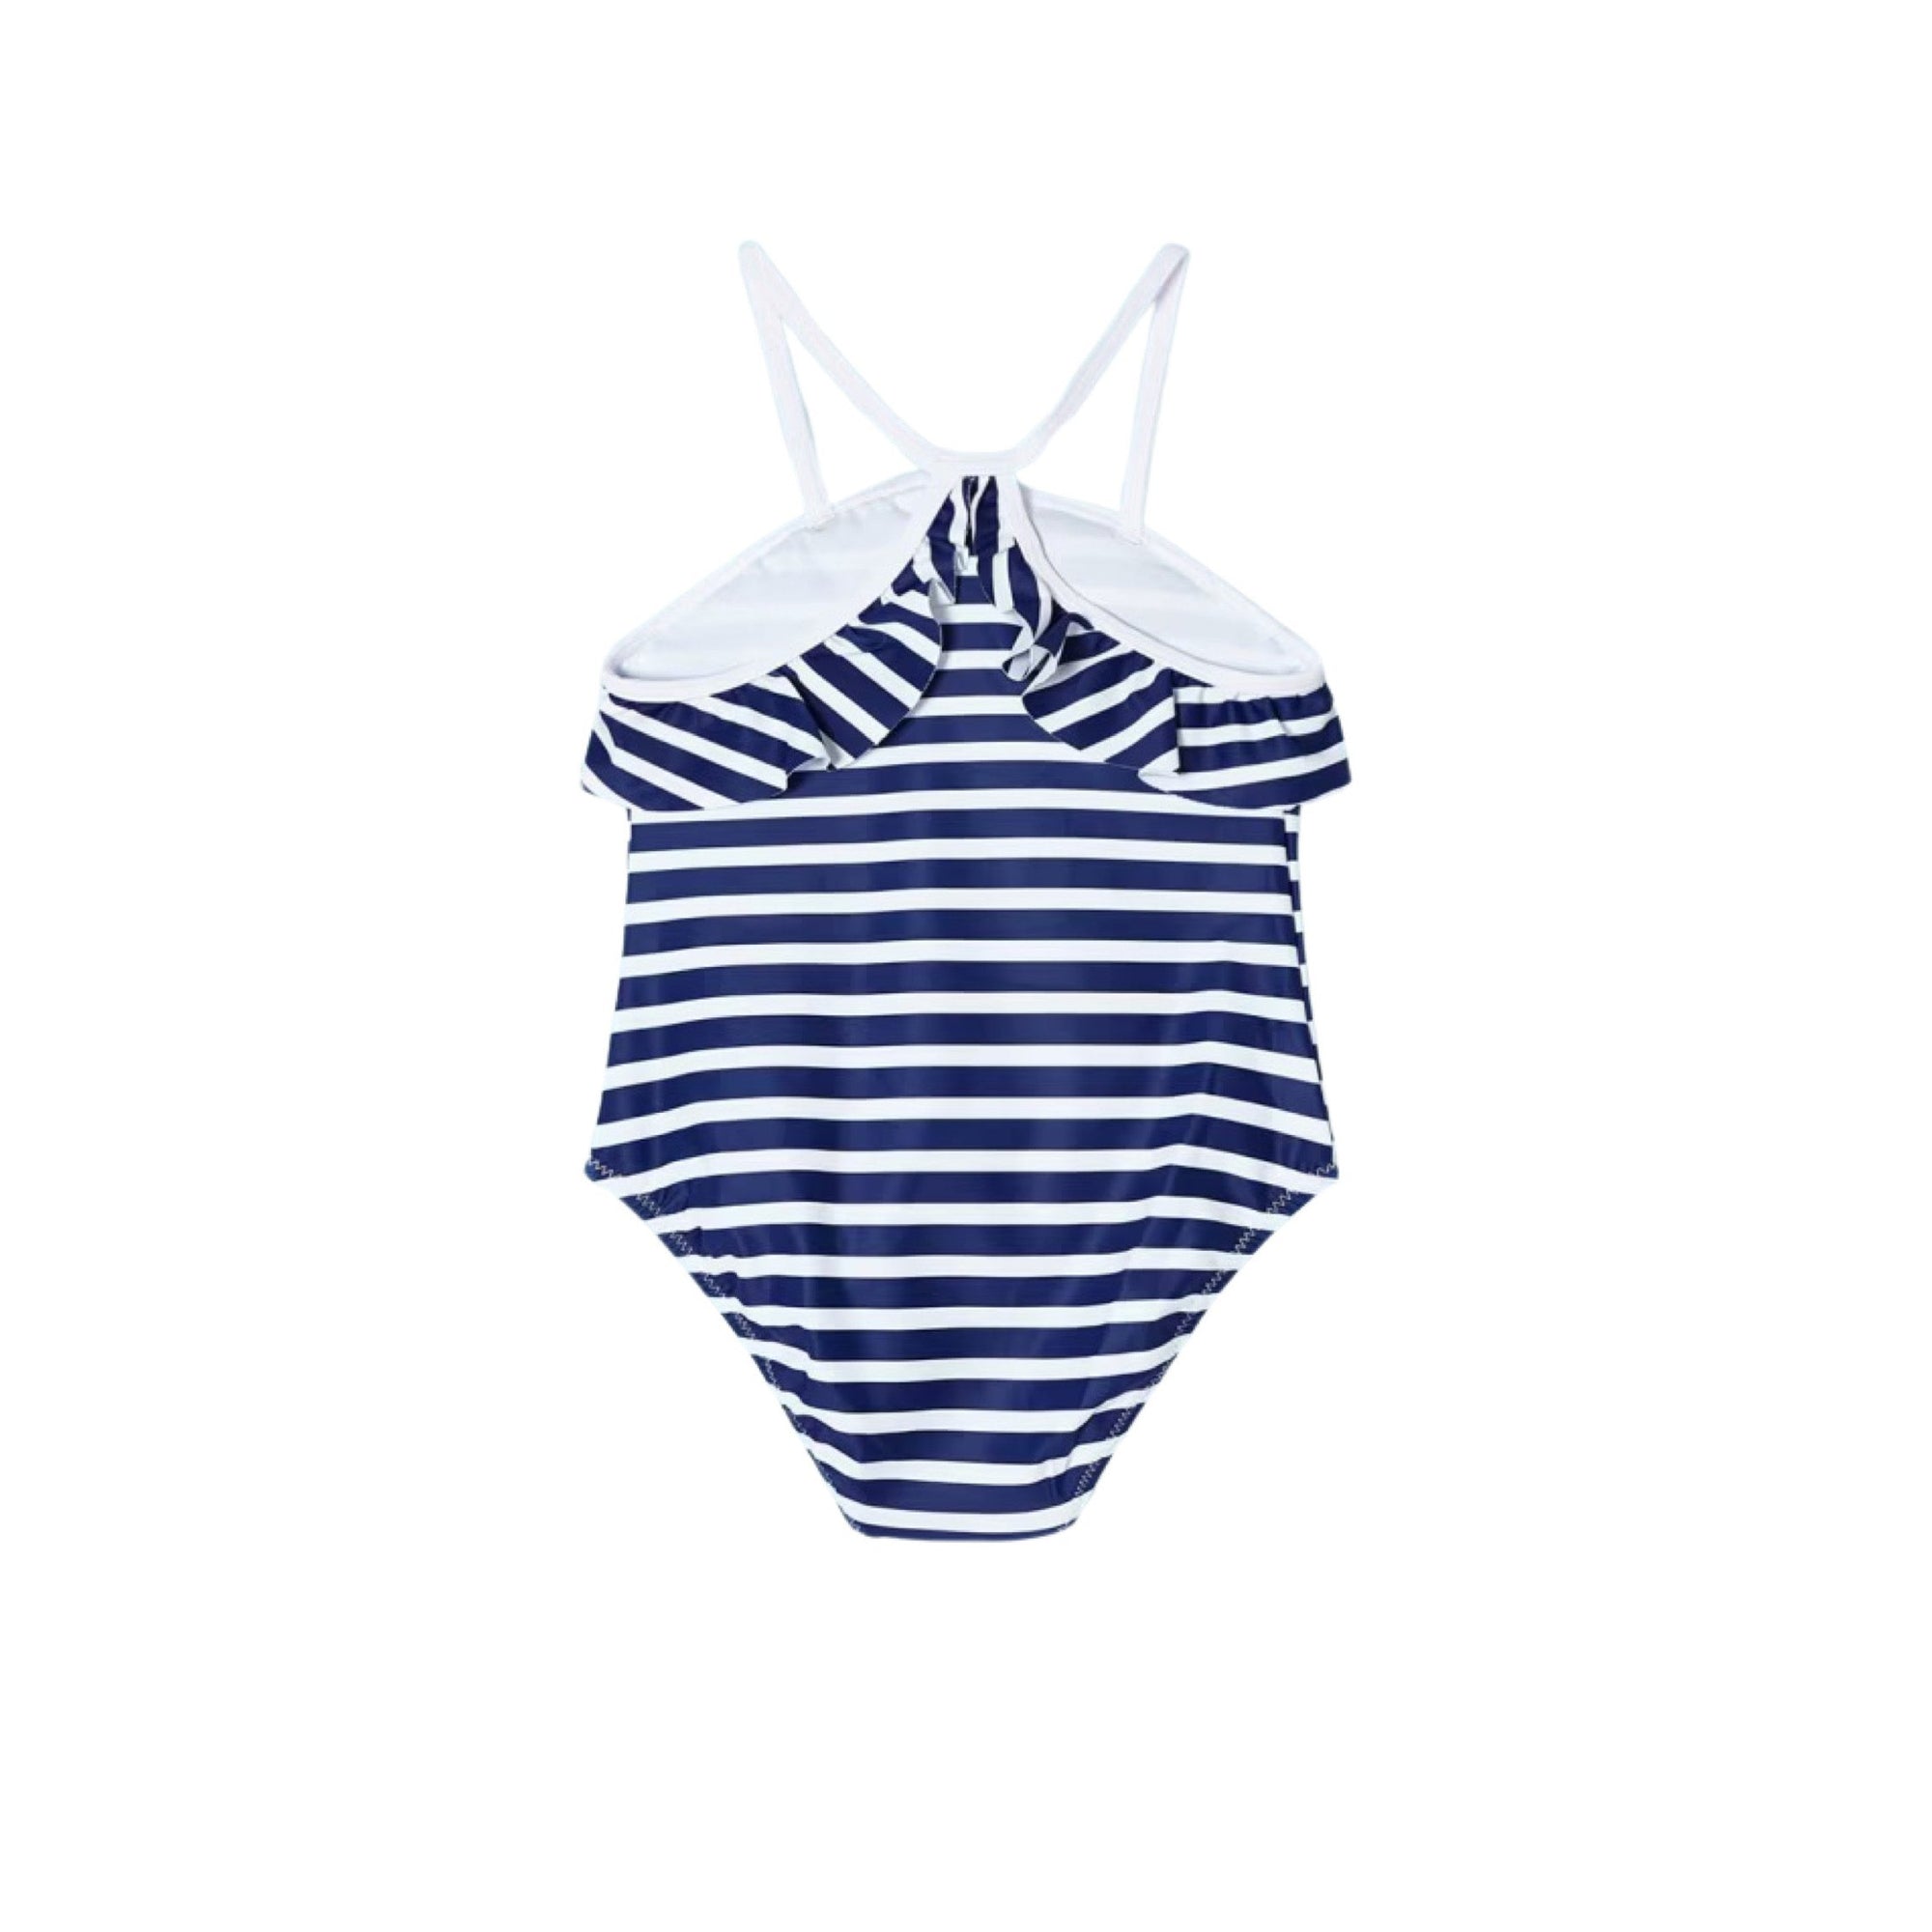 Navy & White Stripe with Pineapple Motif Swimsuit